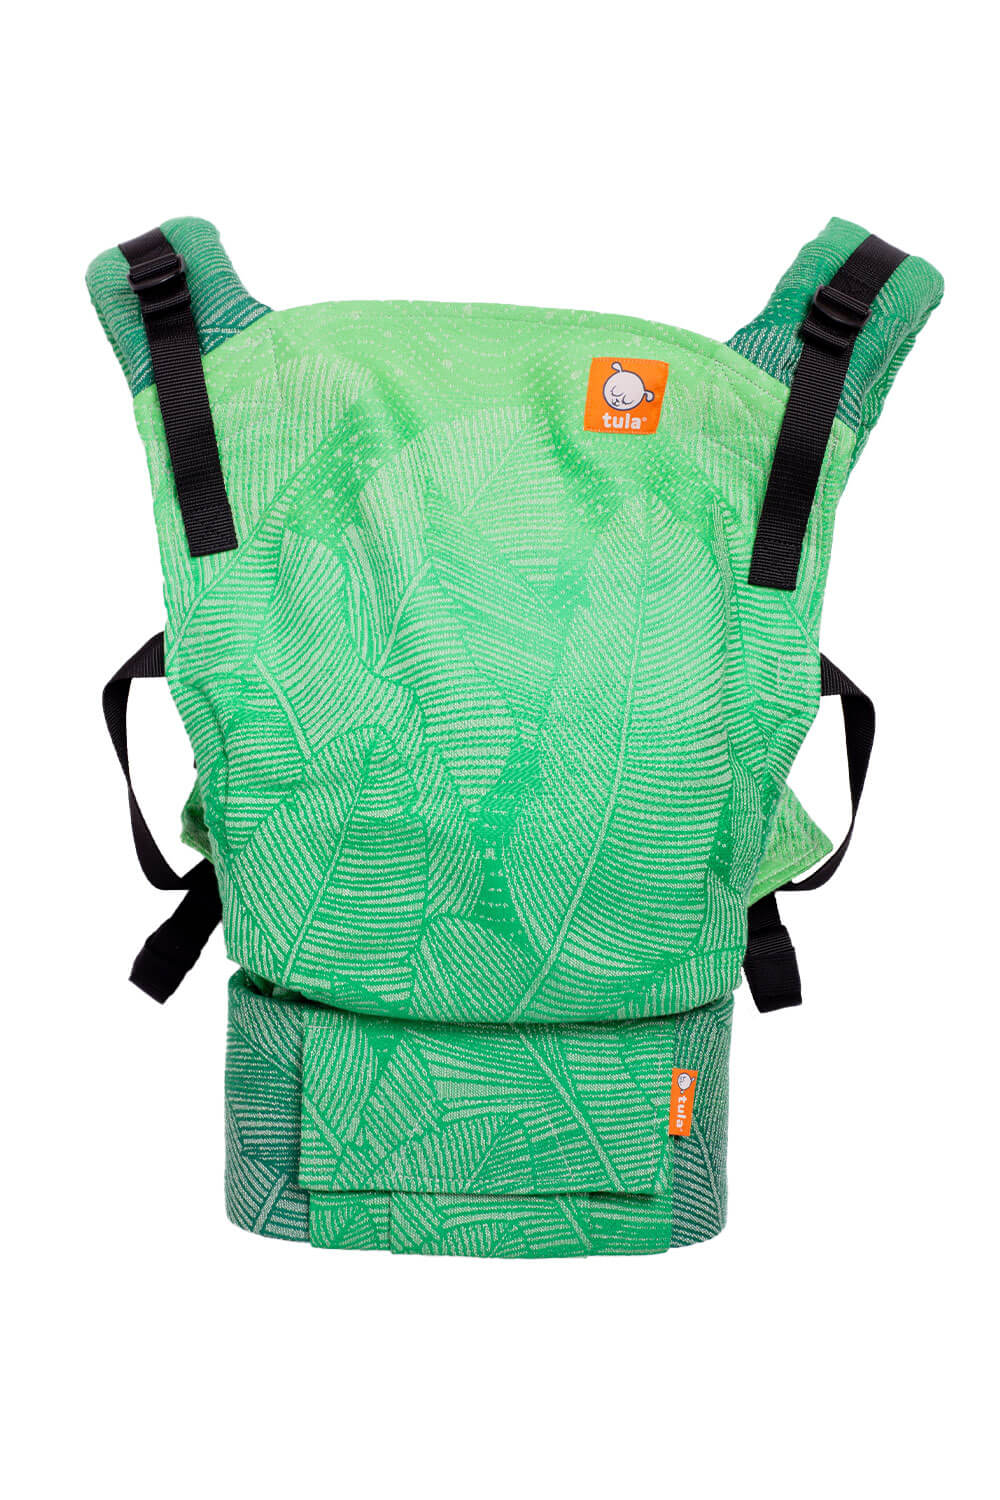 Fronds Flora - Signature Woven Free-to-Grow Baby Carrier